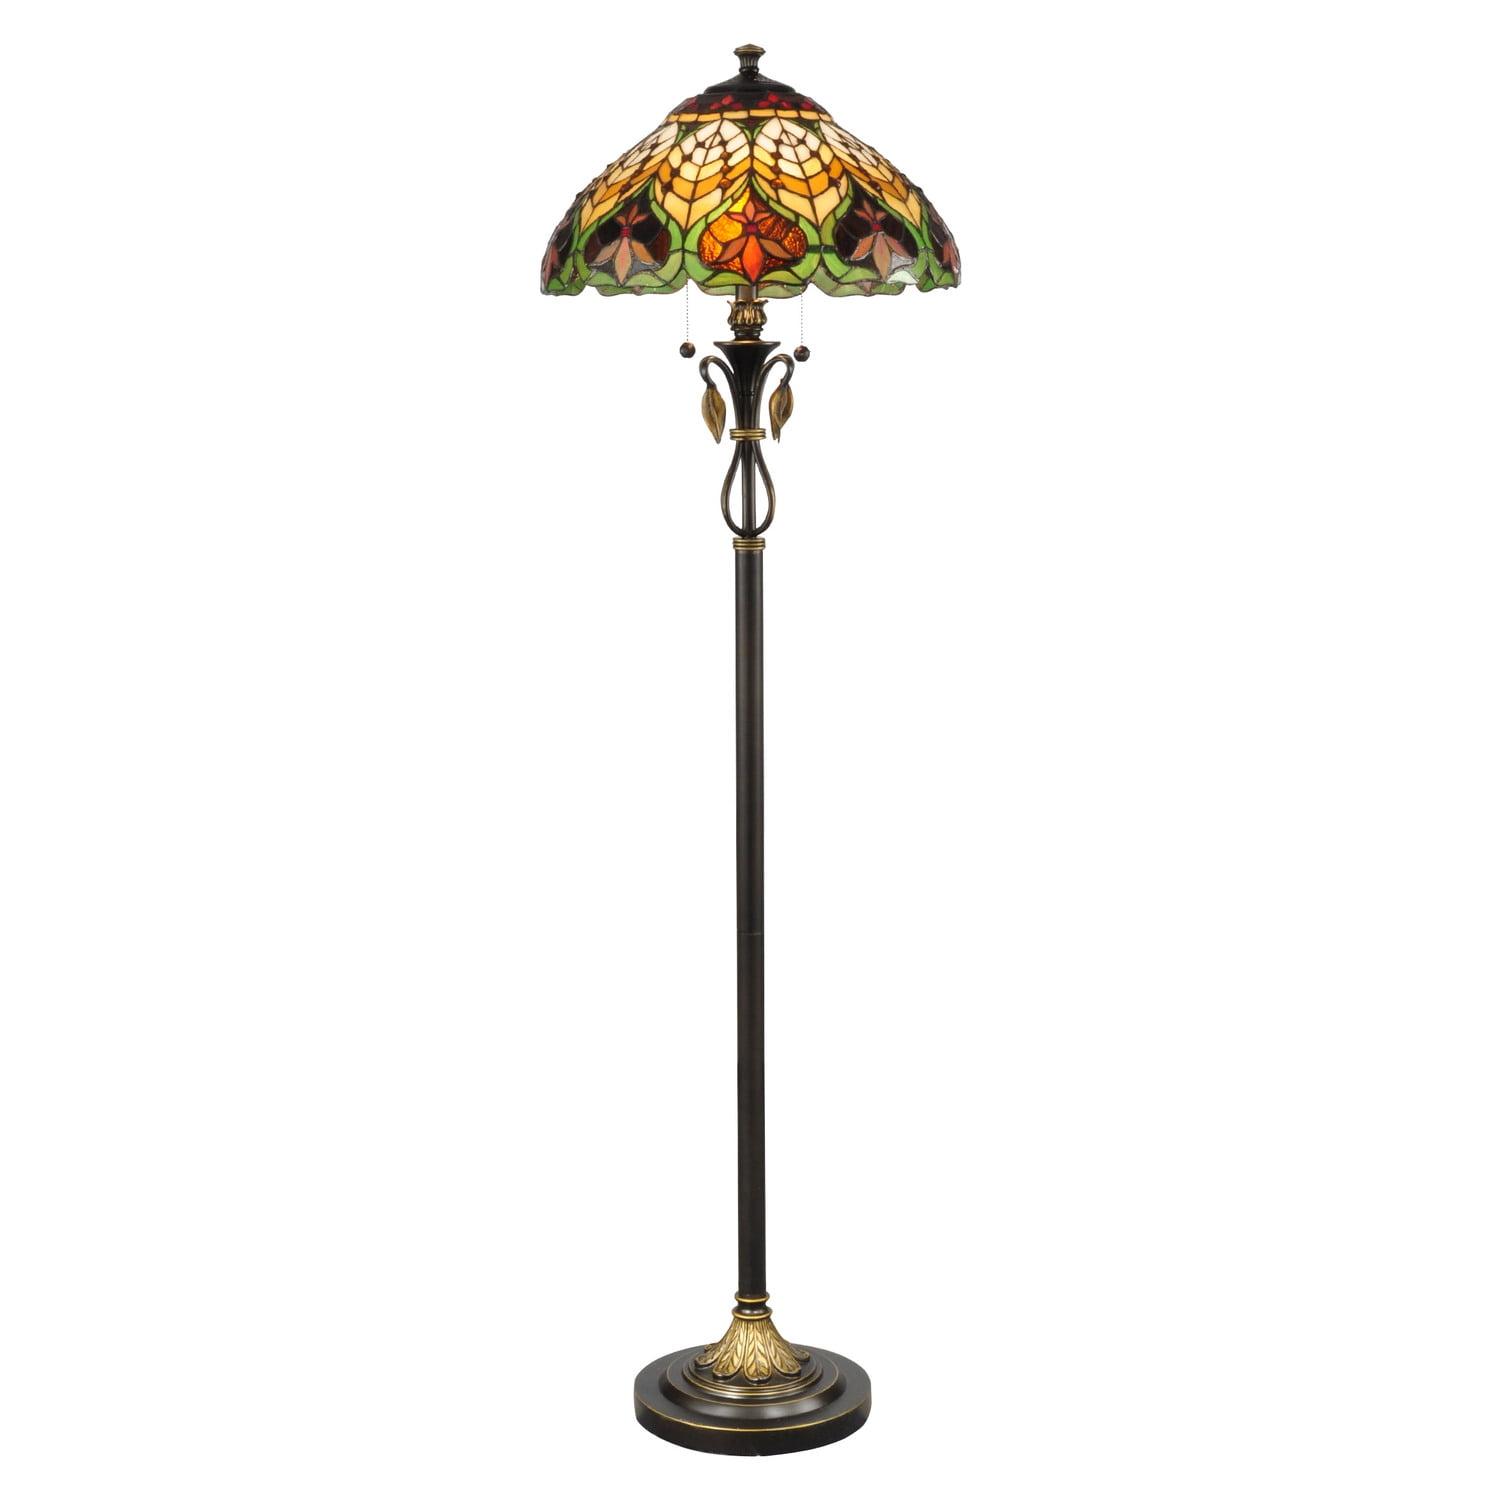 Sir Henry Tropical Getaway Stained Glass Floor Lamp in Antique Brass